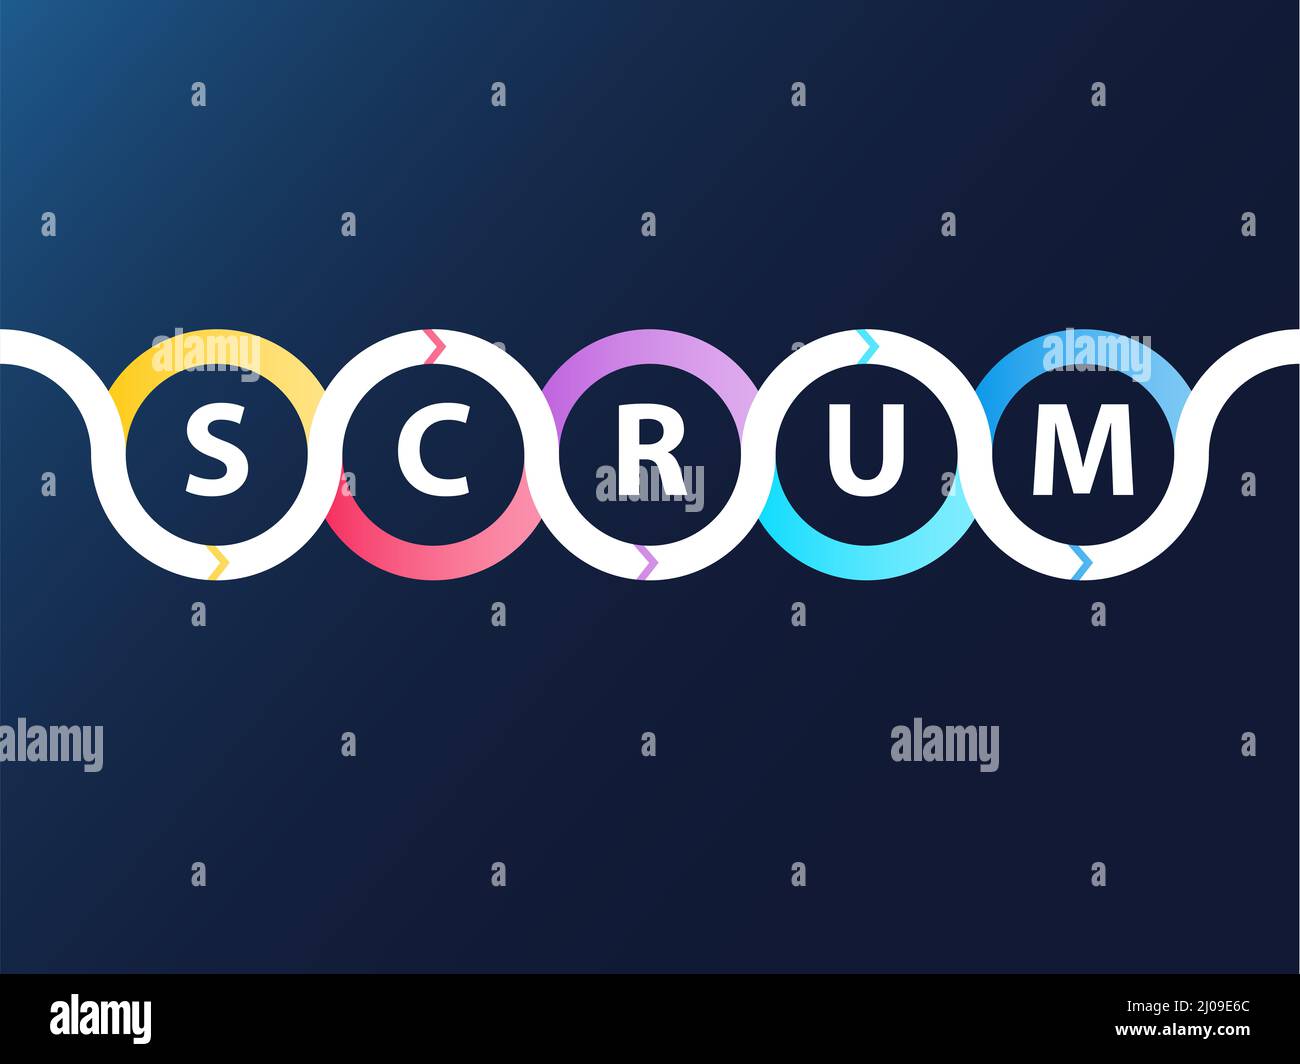 Scrum agile development infographic with text. Perfect as headline or background for presentation or newsletter Stock Photo